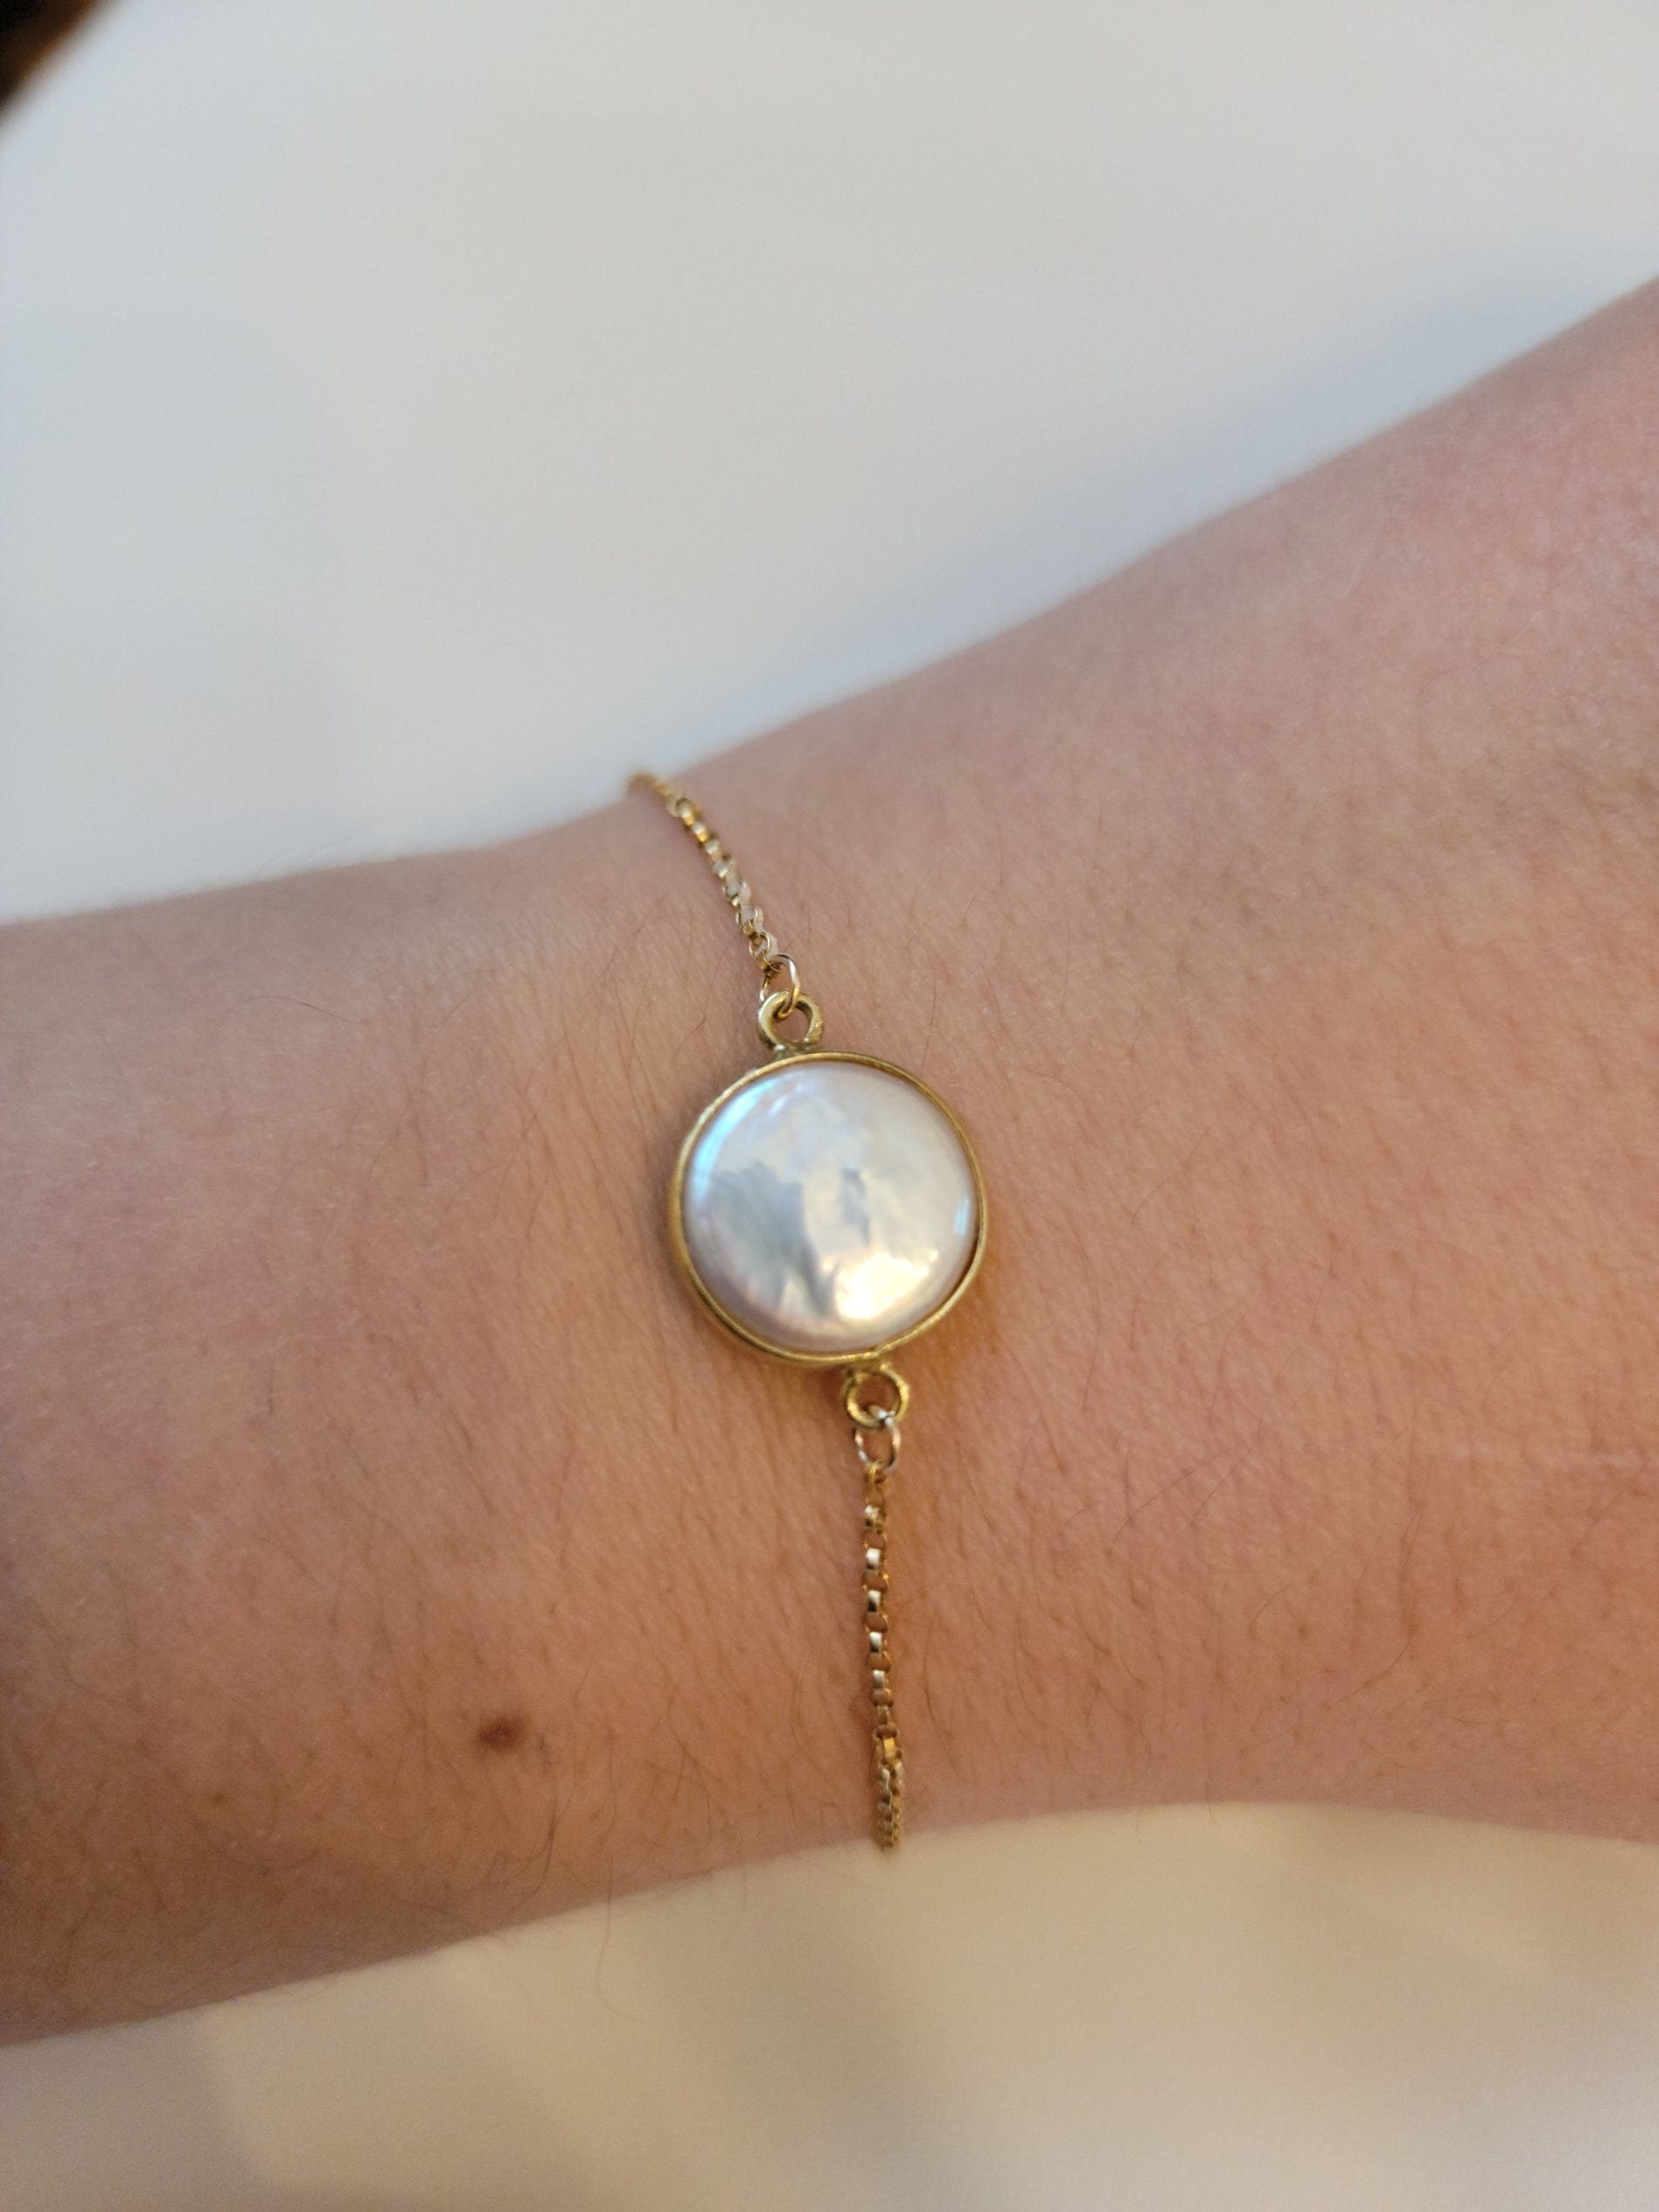 Coin pearl with gold plated bezel hand assembled on gold filled adjustable bracelet. 